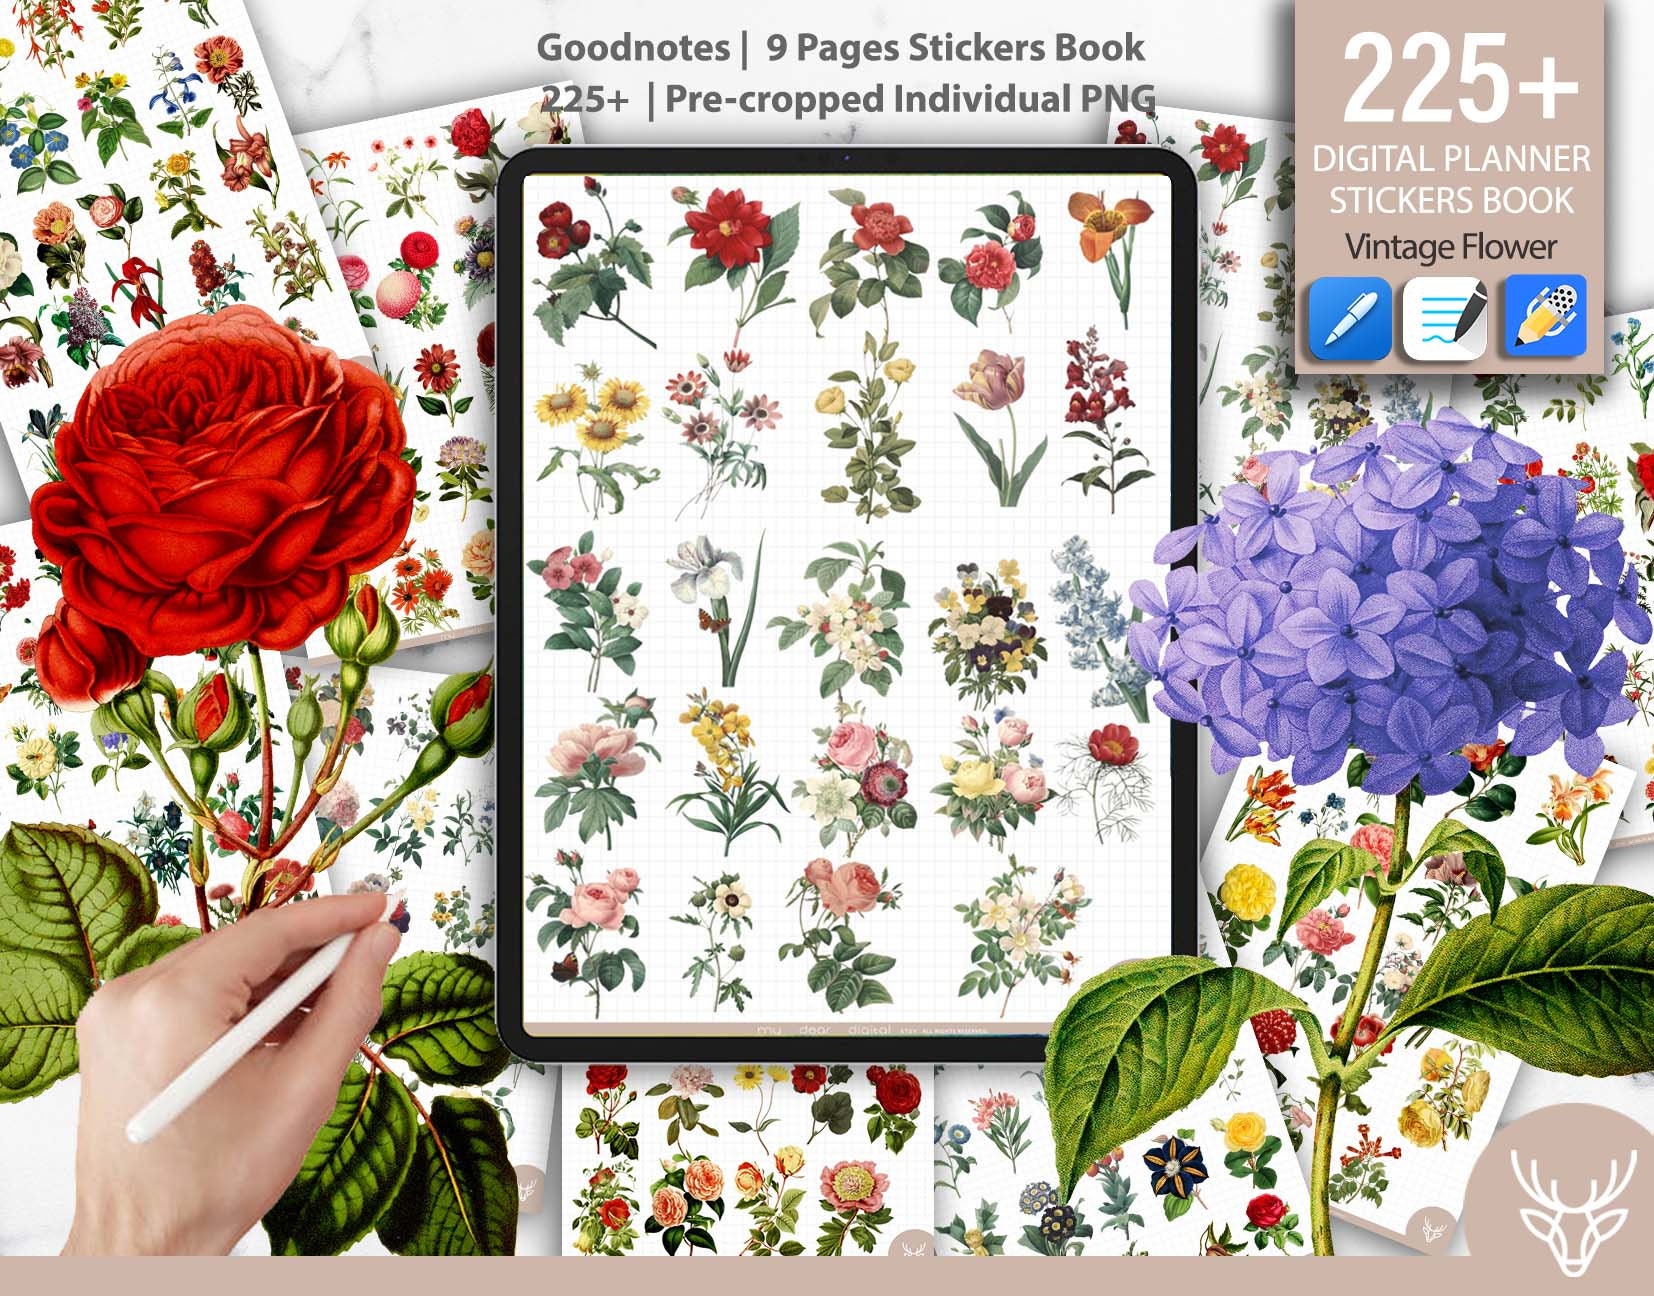 50pcs Flower Stickers, Natural Vintage Floral Stickers Waterproof Self-Adhesive Scrapbooking Stickers for Scrapbook Laptop Planners DIY Crafts